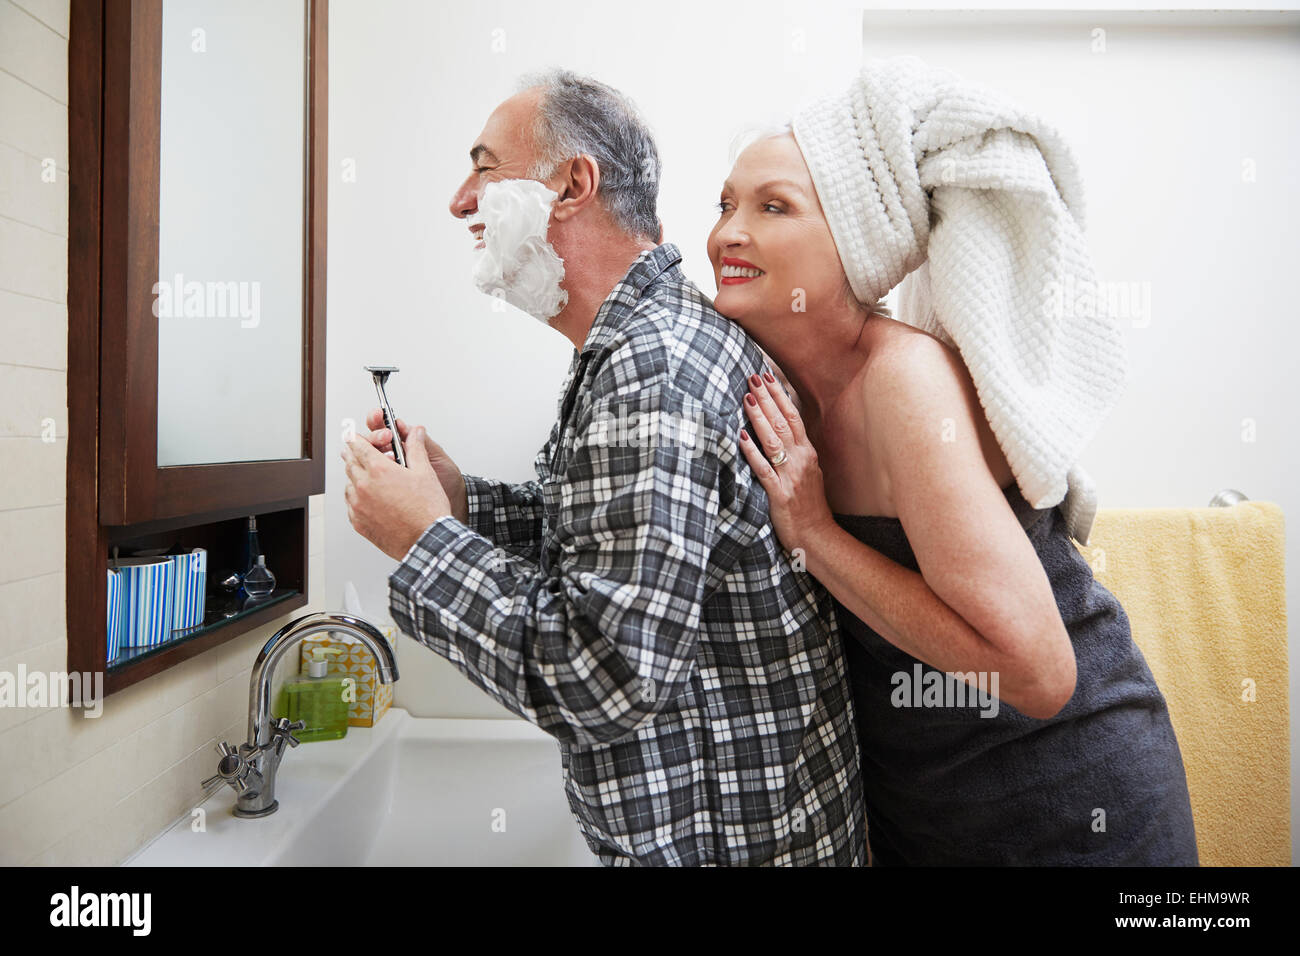 Older couple getting ready in bathroom Stock Photo